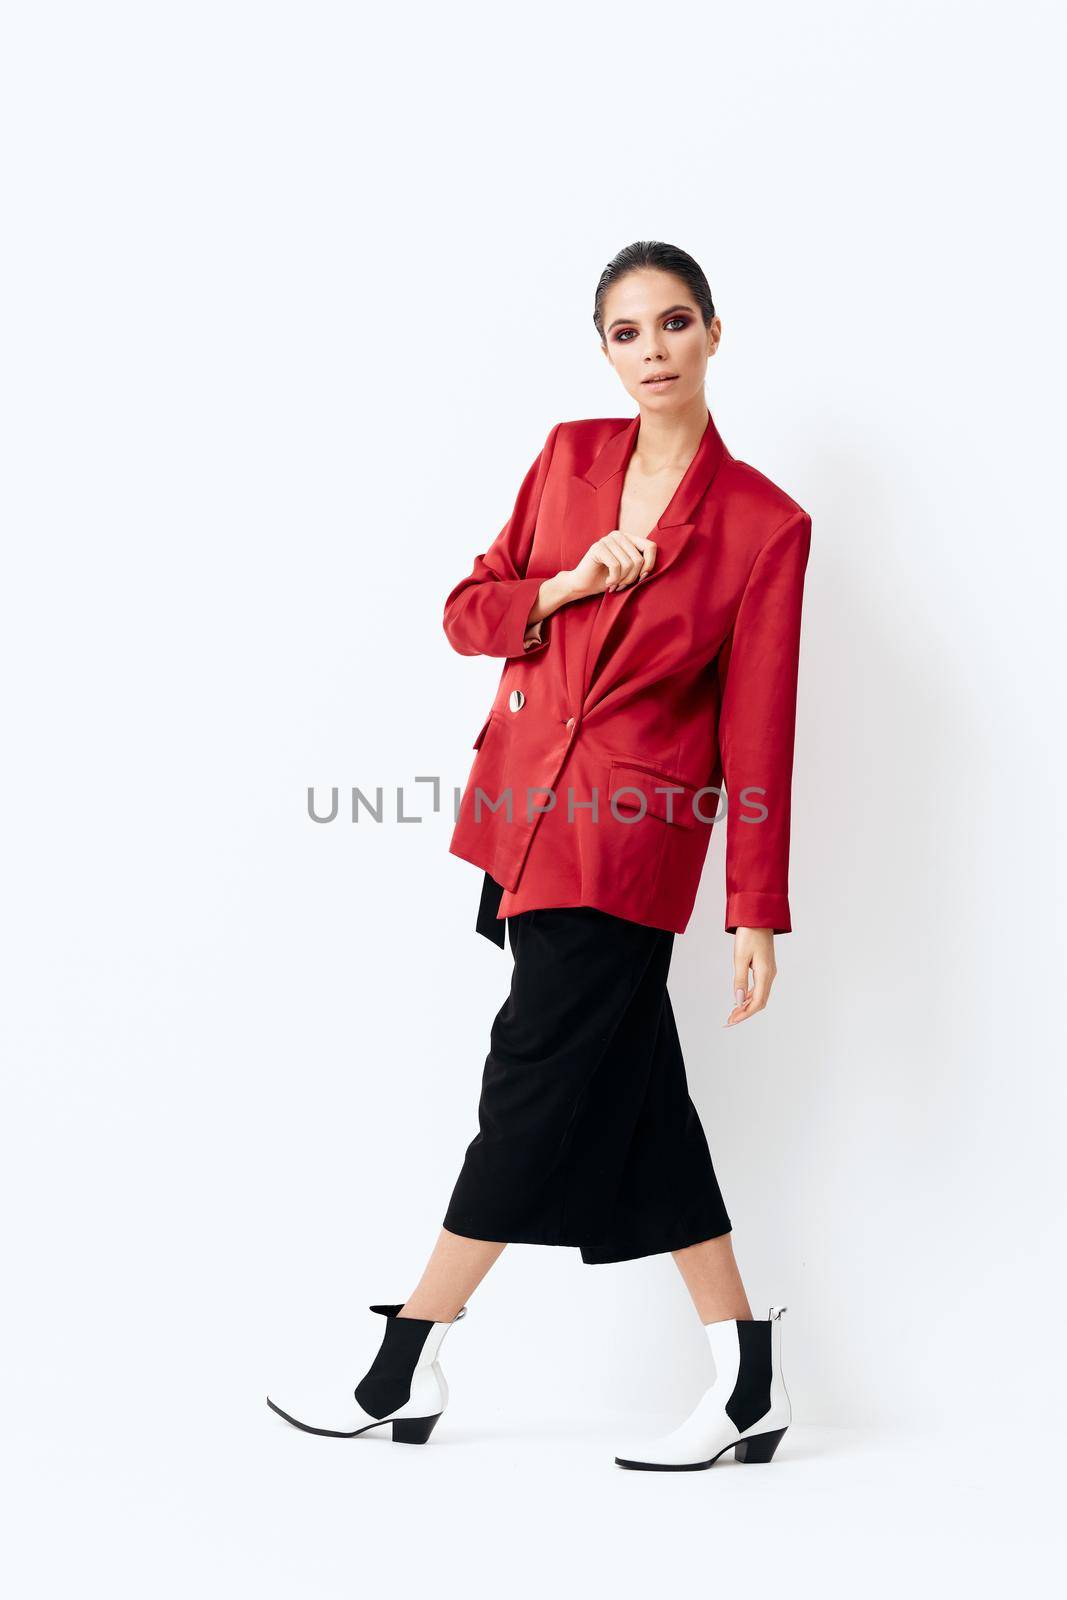 woman in red blazer fashion clothes glamor cosmetics. High quality photo